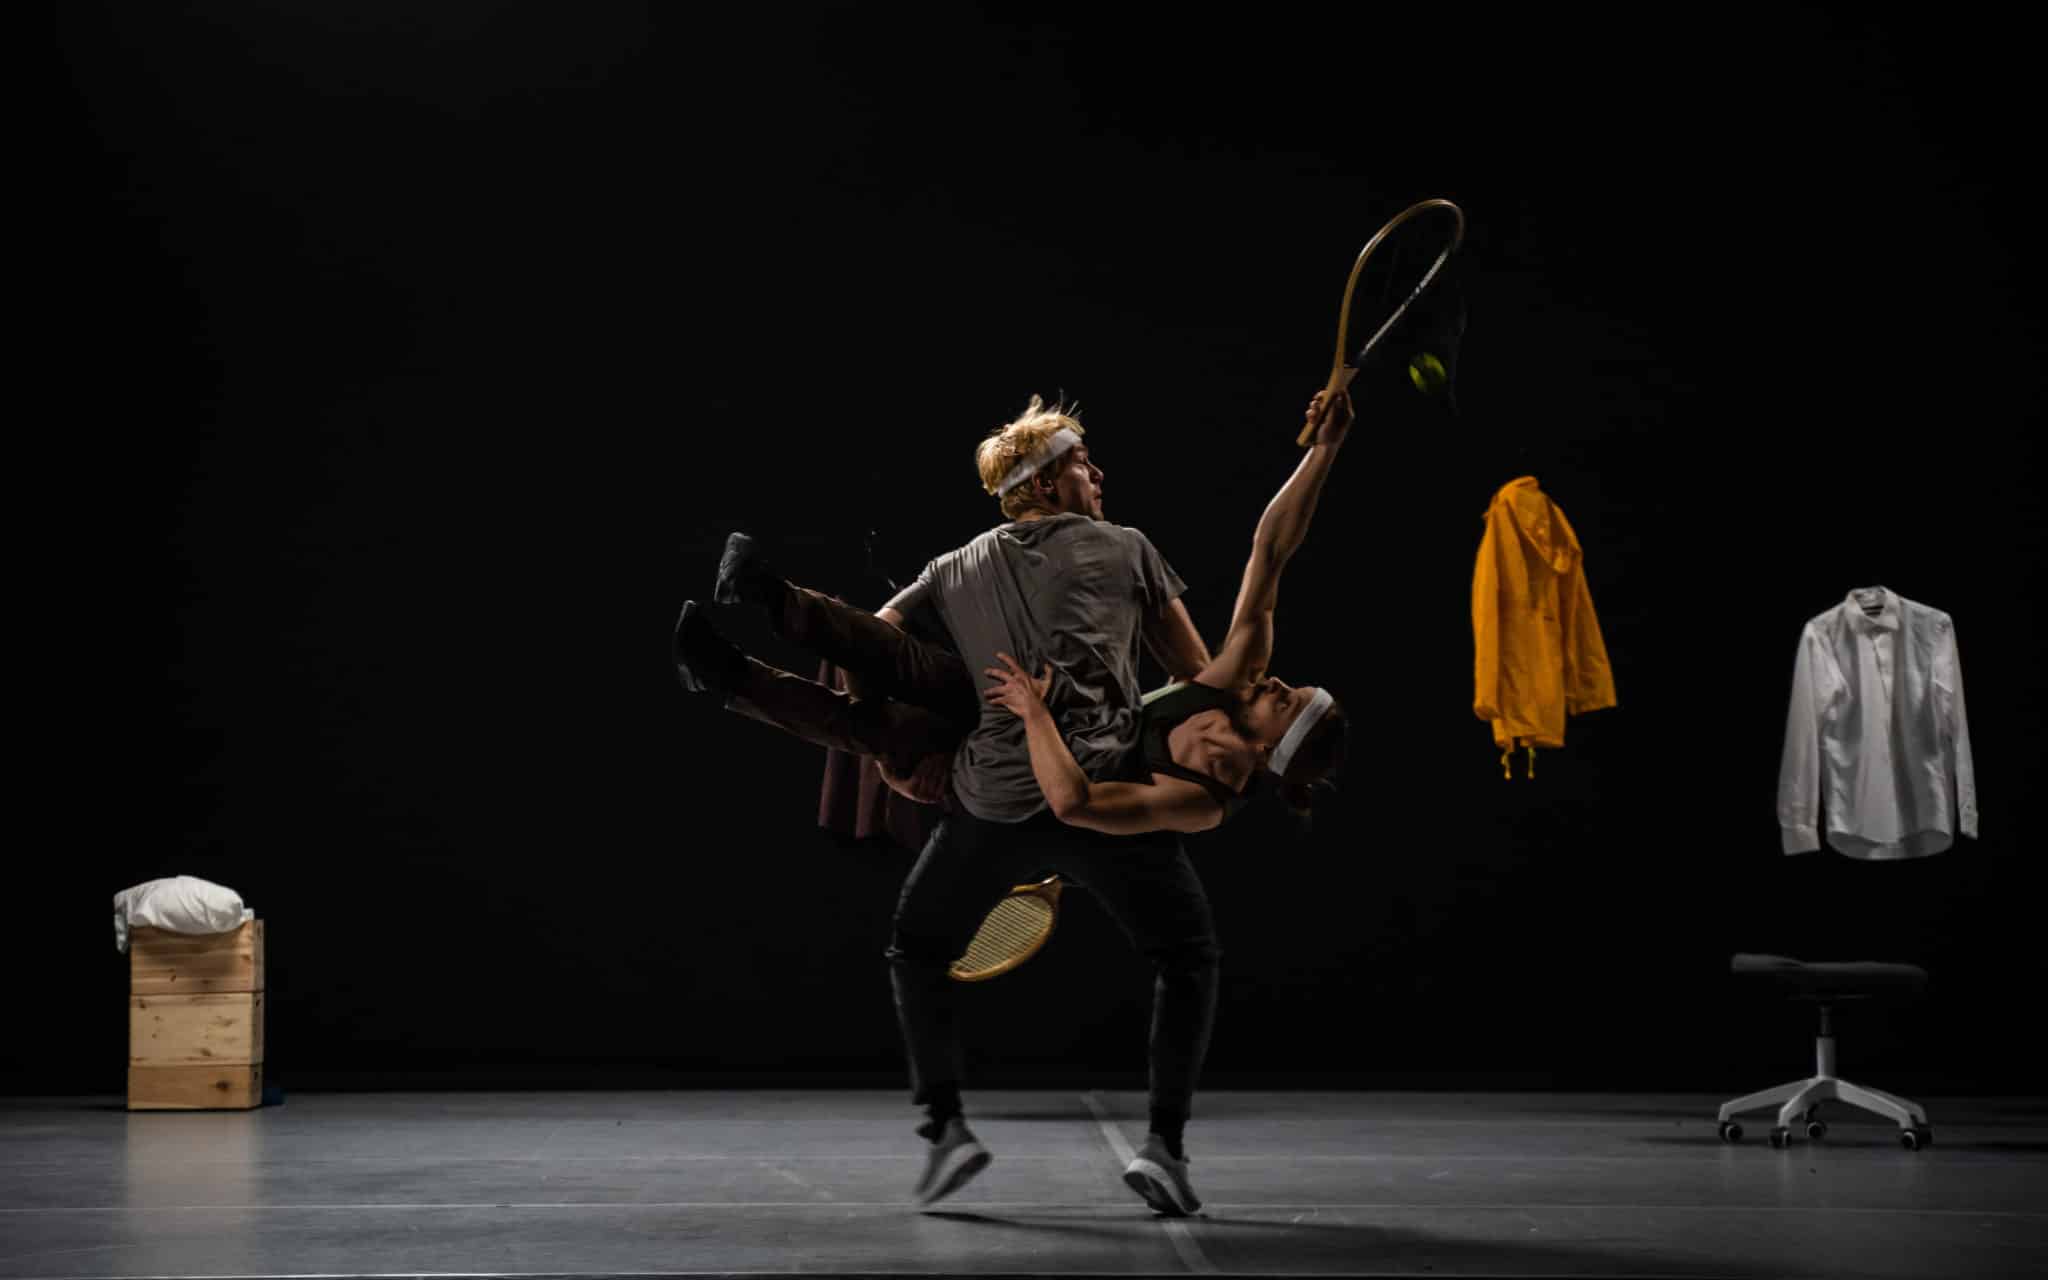 Still image from the performance. Dimly lit stage, where two performers are in the middle of an acrobatic stunt, with tennis rackets and a ball. A jacket, shirt and seatings can be seen in the background of the stage.